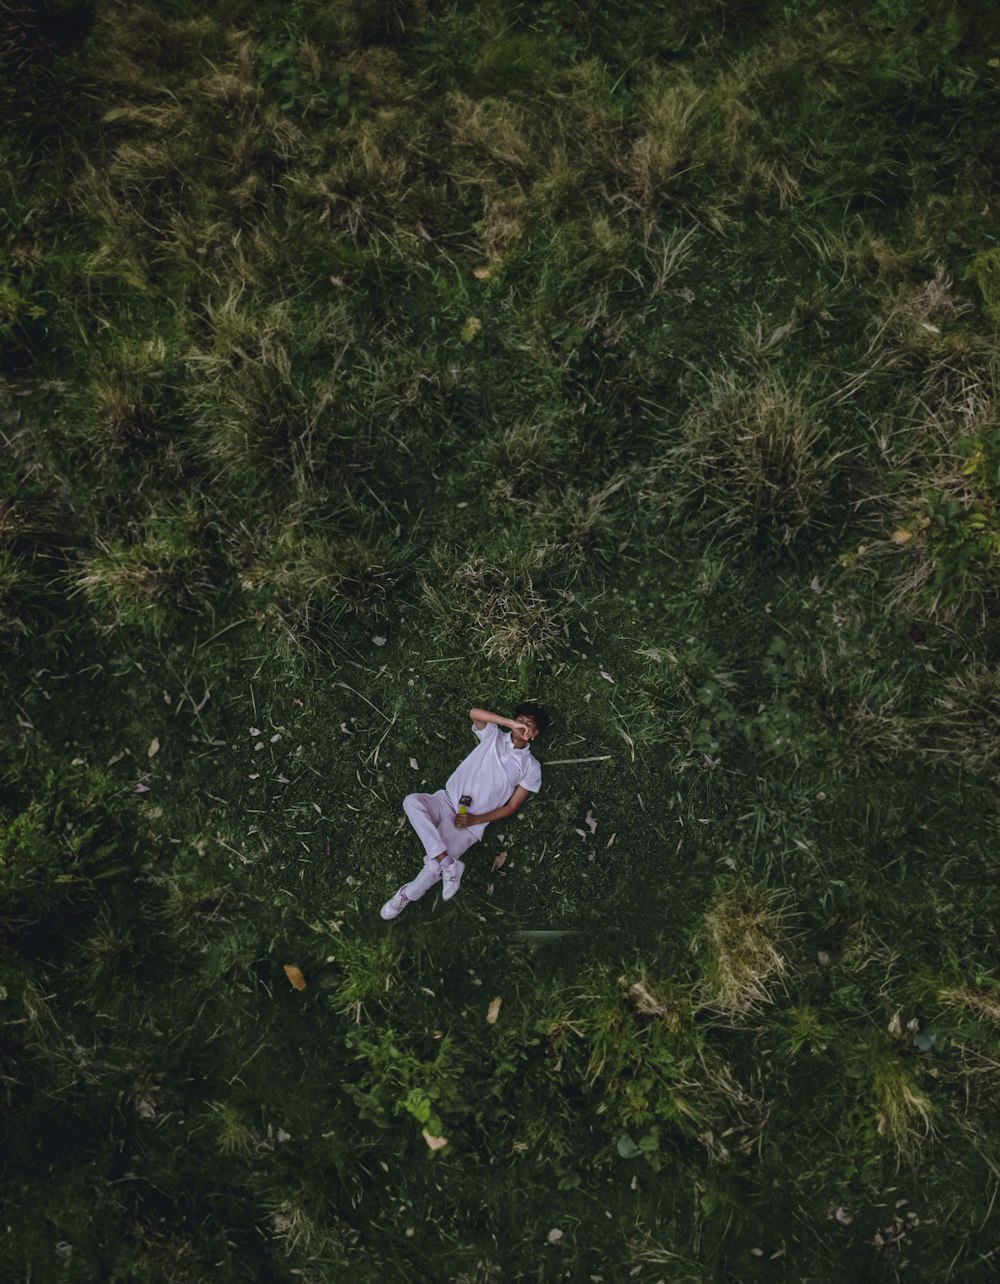 an overhead view of a teddy bear laying in the grass